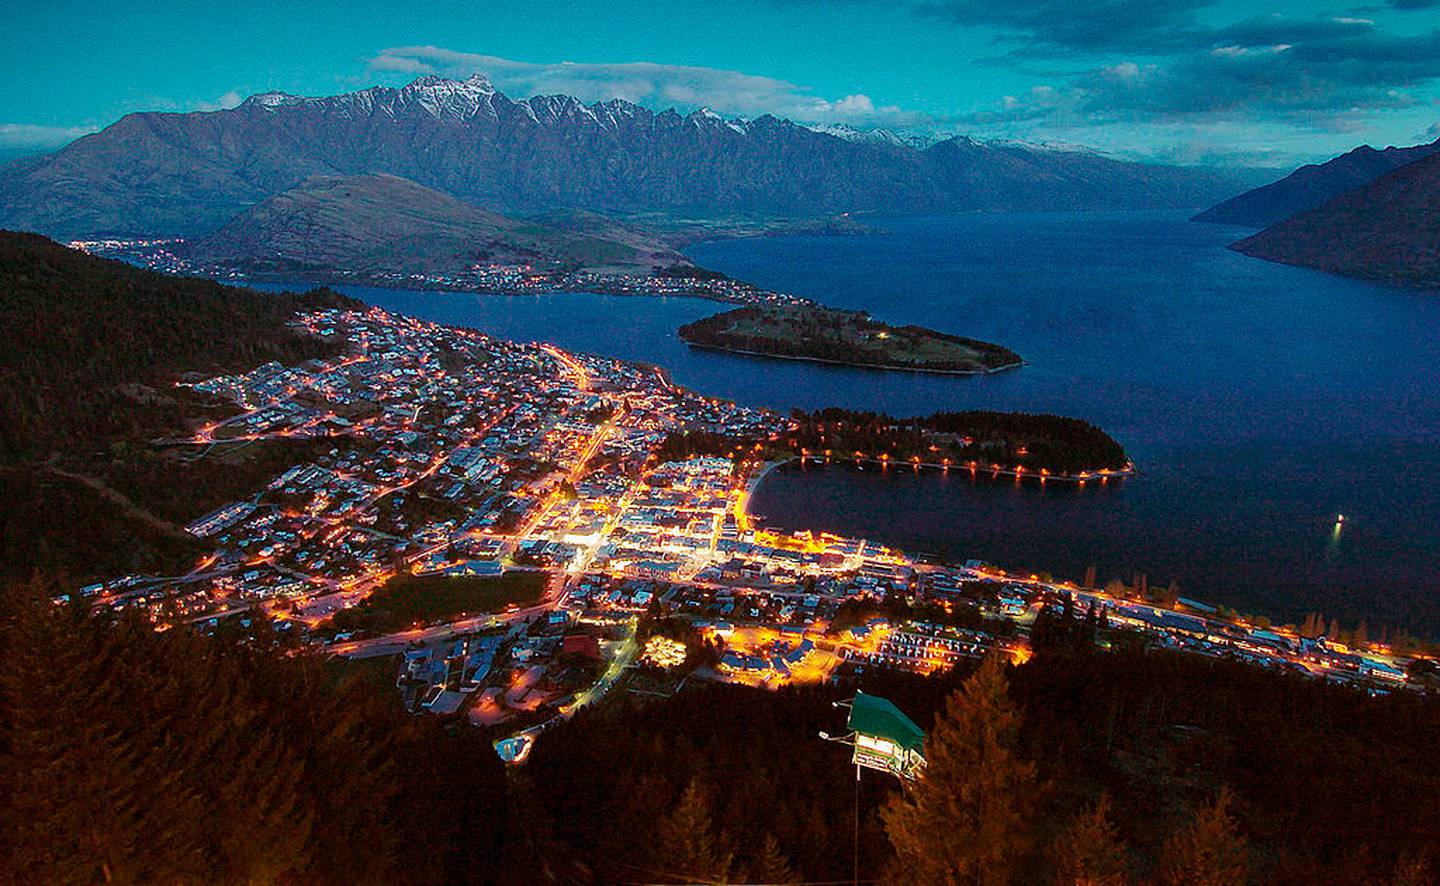 Queenstown at dusk with Lake Wakatipu and the Remarkables mountain range. Photo / Getty